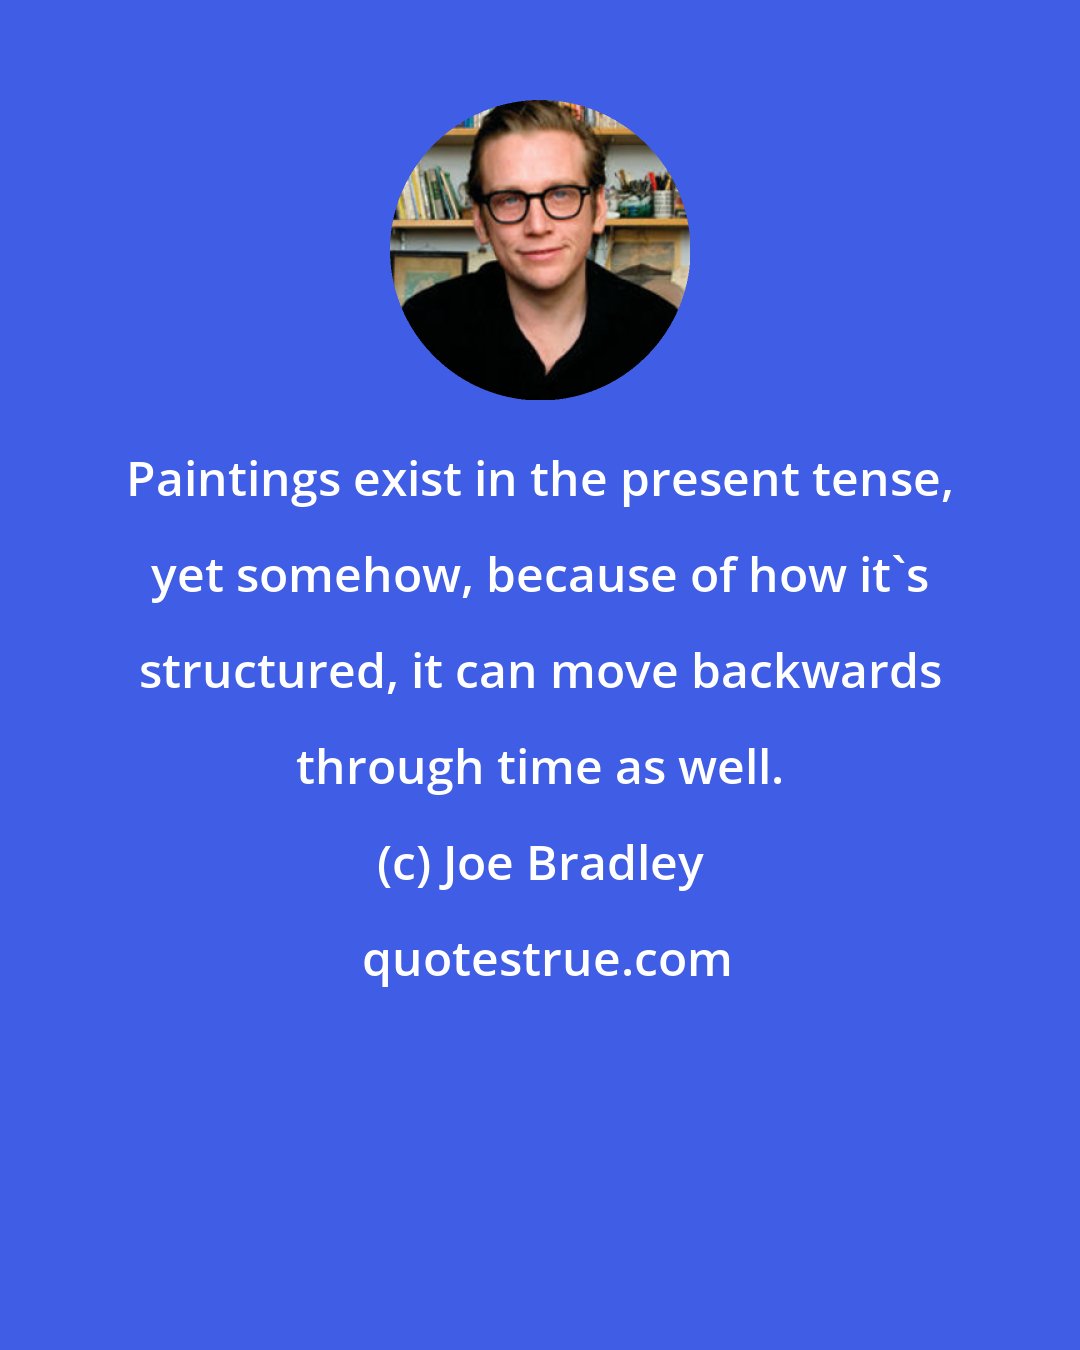 Joe Bradley: Paintings exist in the present tense, yet somehow, because of how it's structured, it can move backwards through time as well.